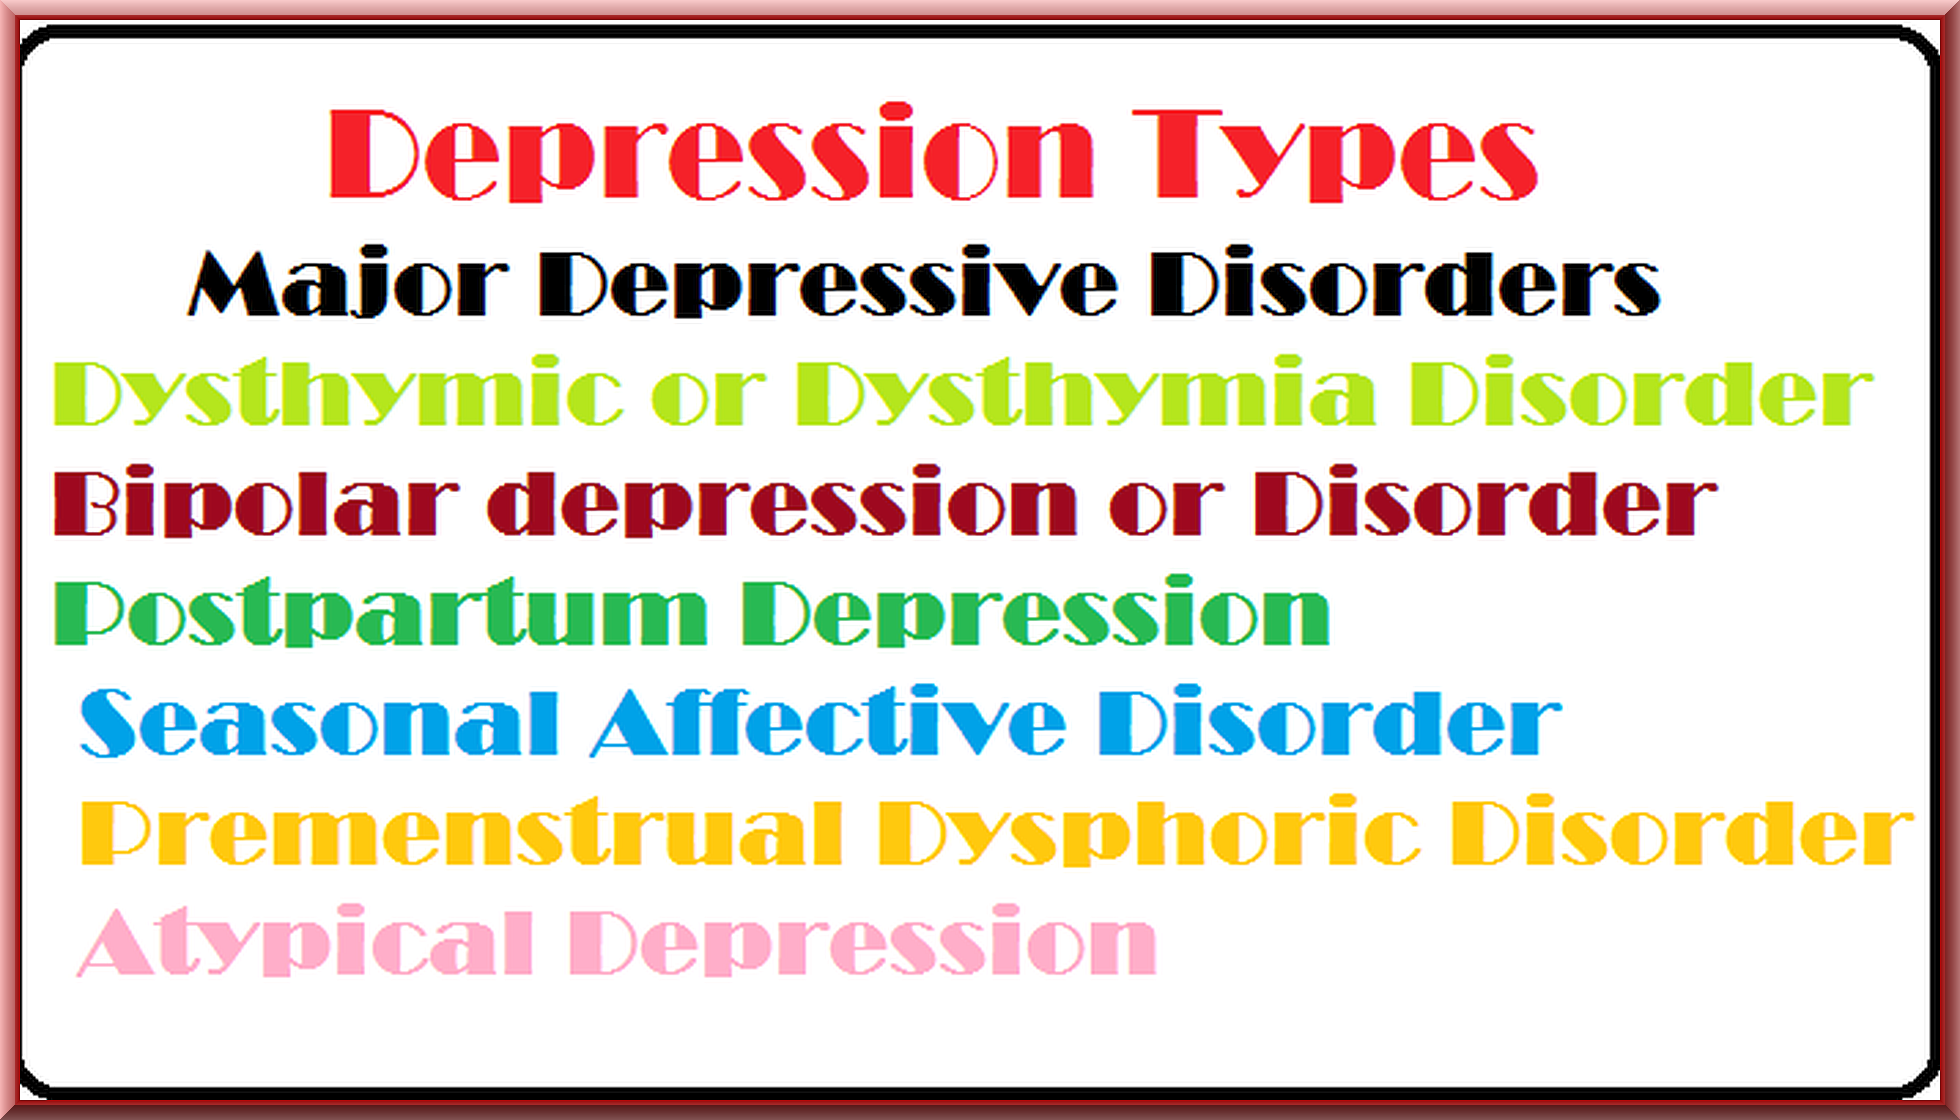 Do You Need Help On All 7 Types Of Depression?